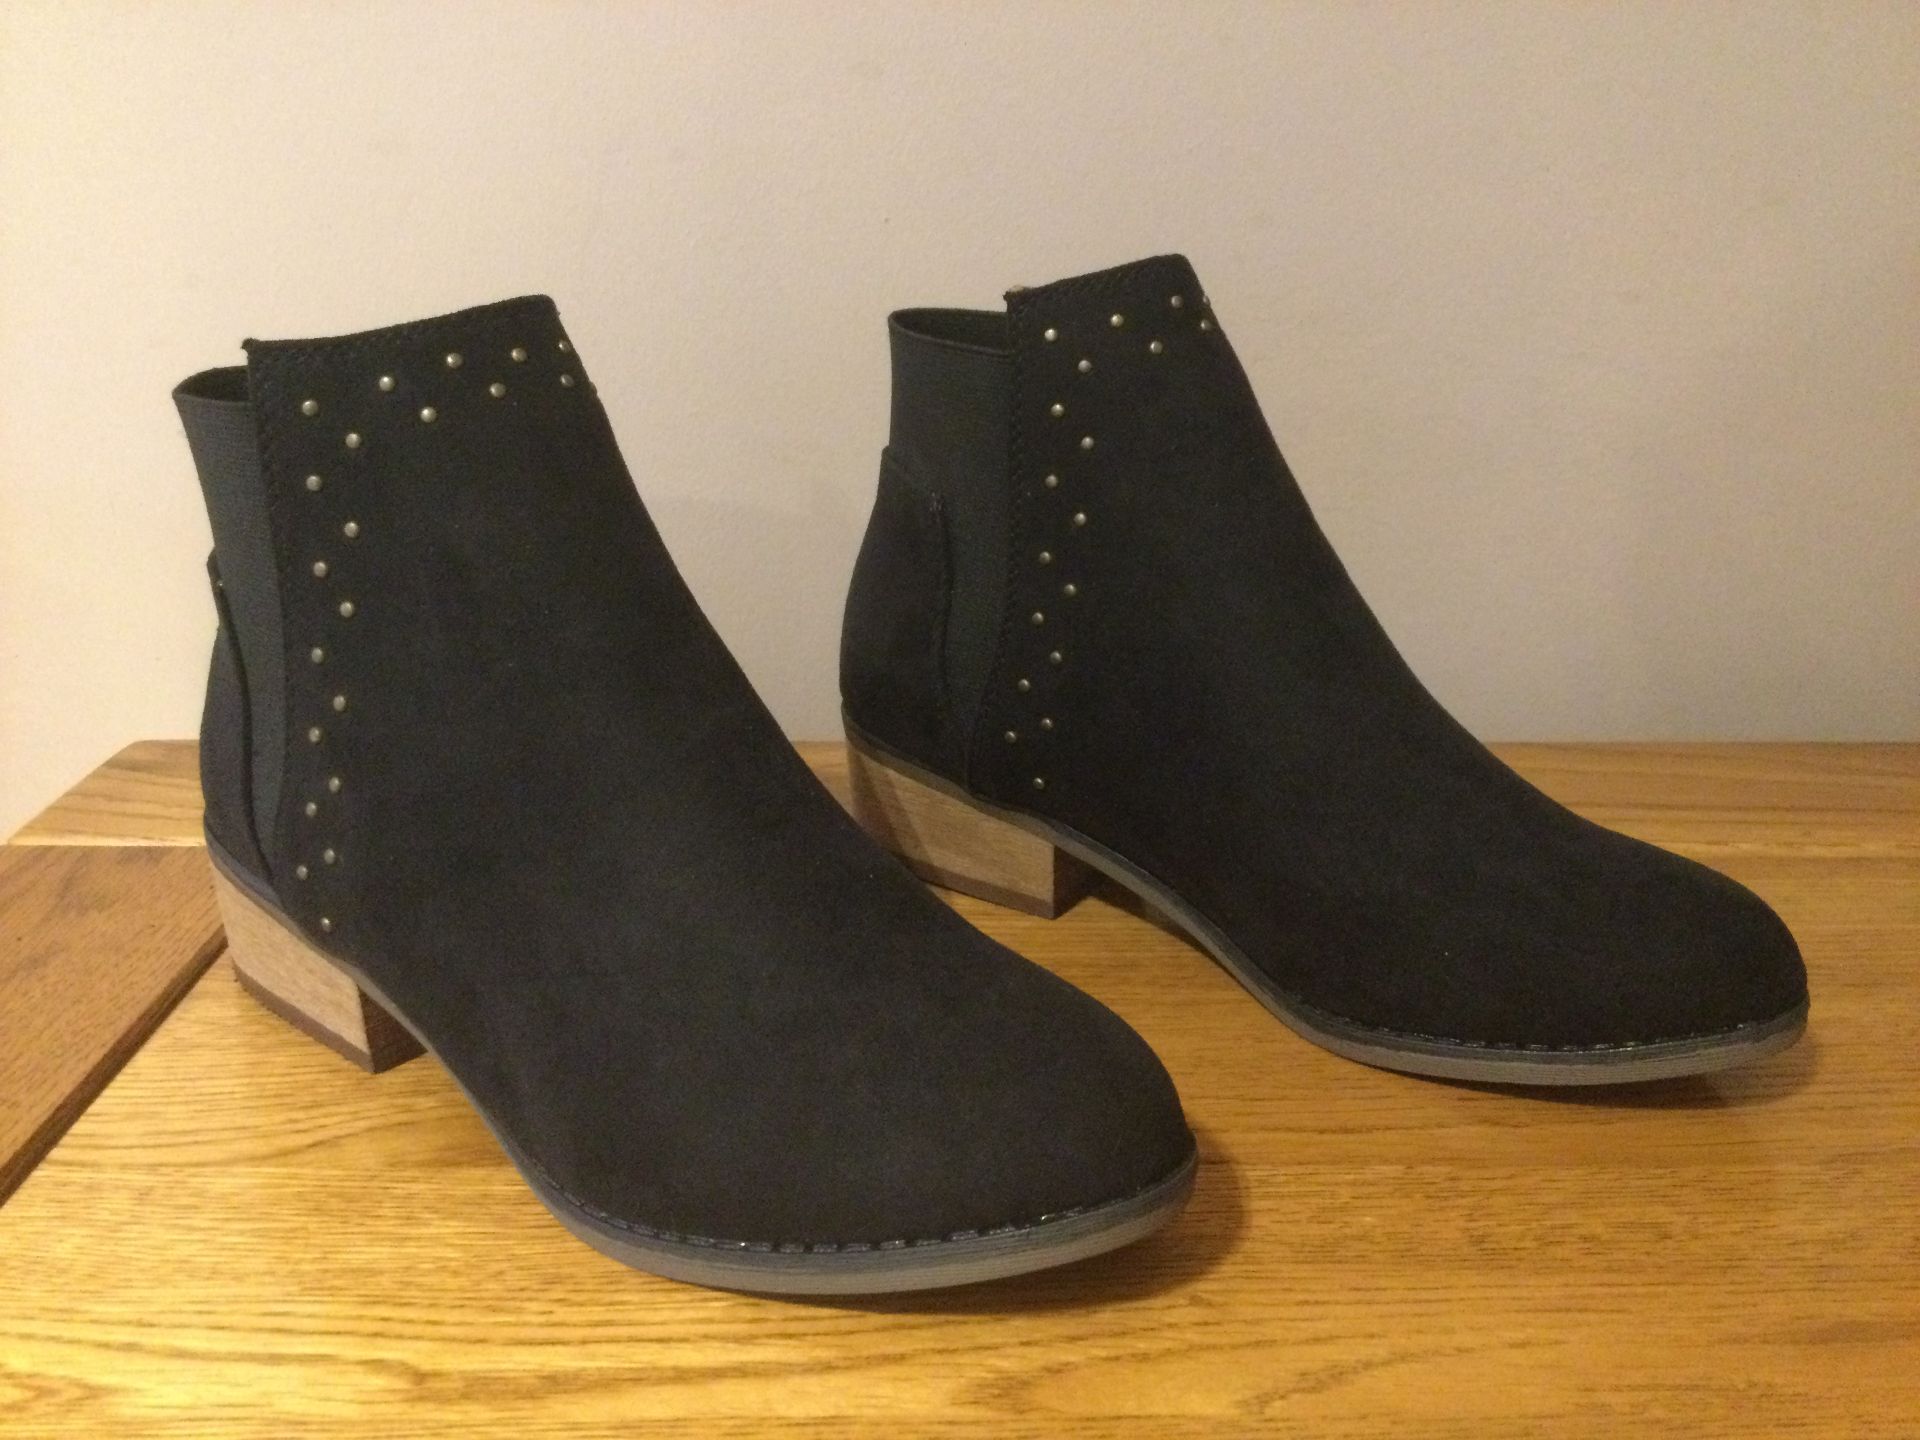 Dolcis “Wendy” Low Heel Ankle Boots, Size 5, Black - New RRP £45.99